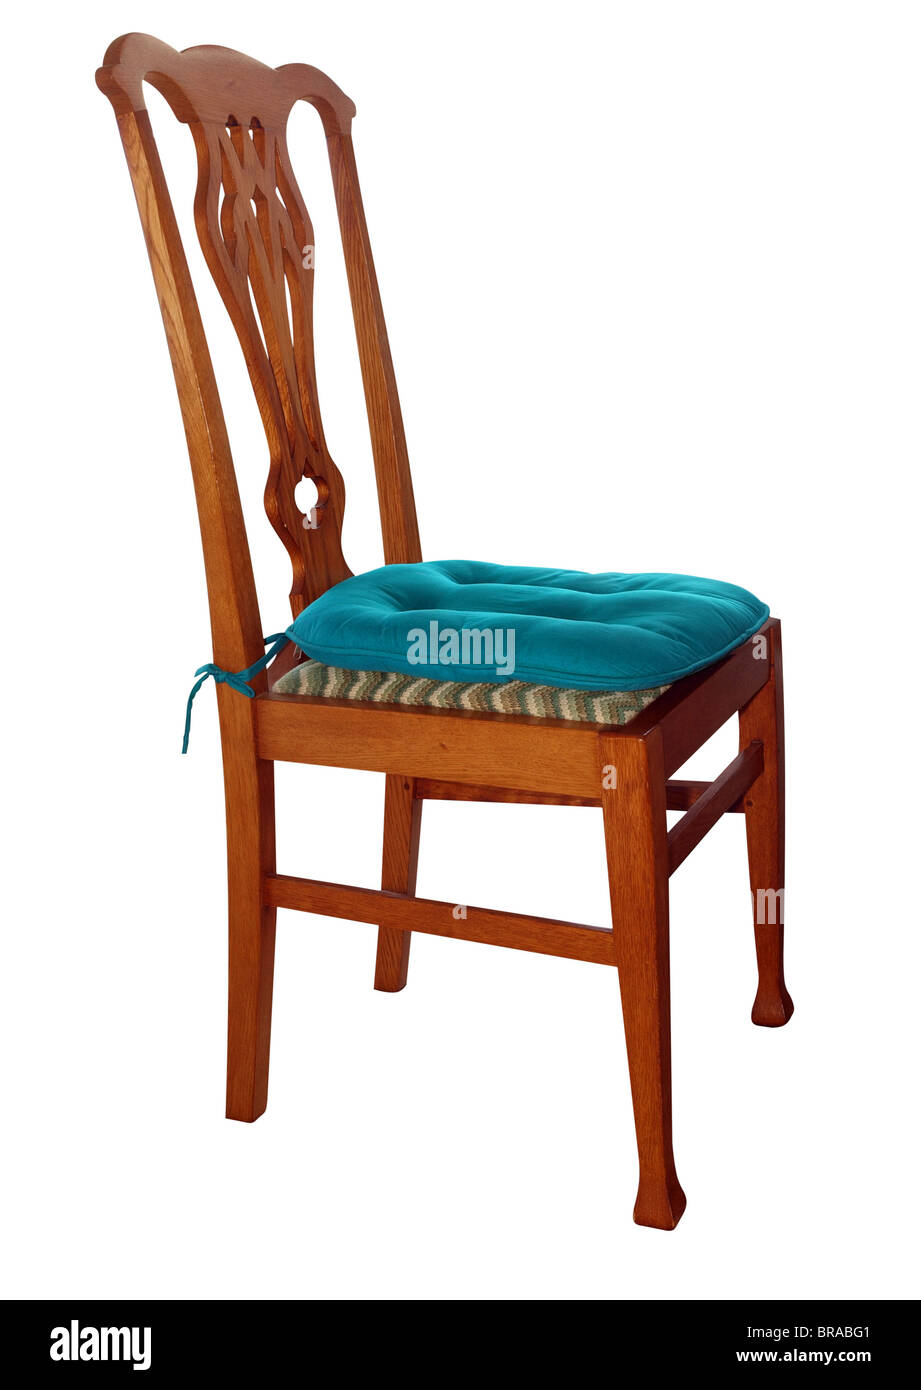 Chaise ancienne avec coussin isolé avec clipping path Photo Stock - Alamy